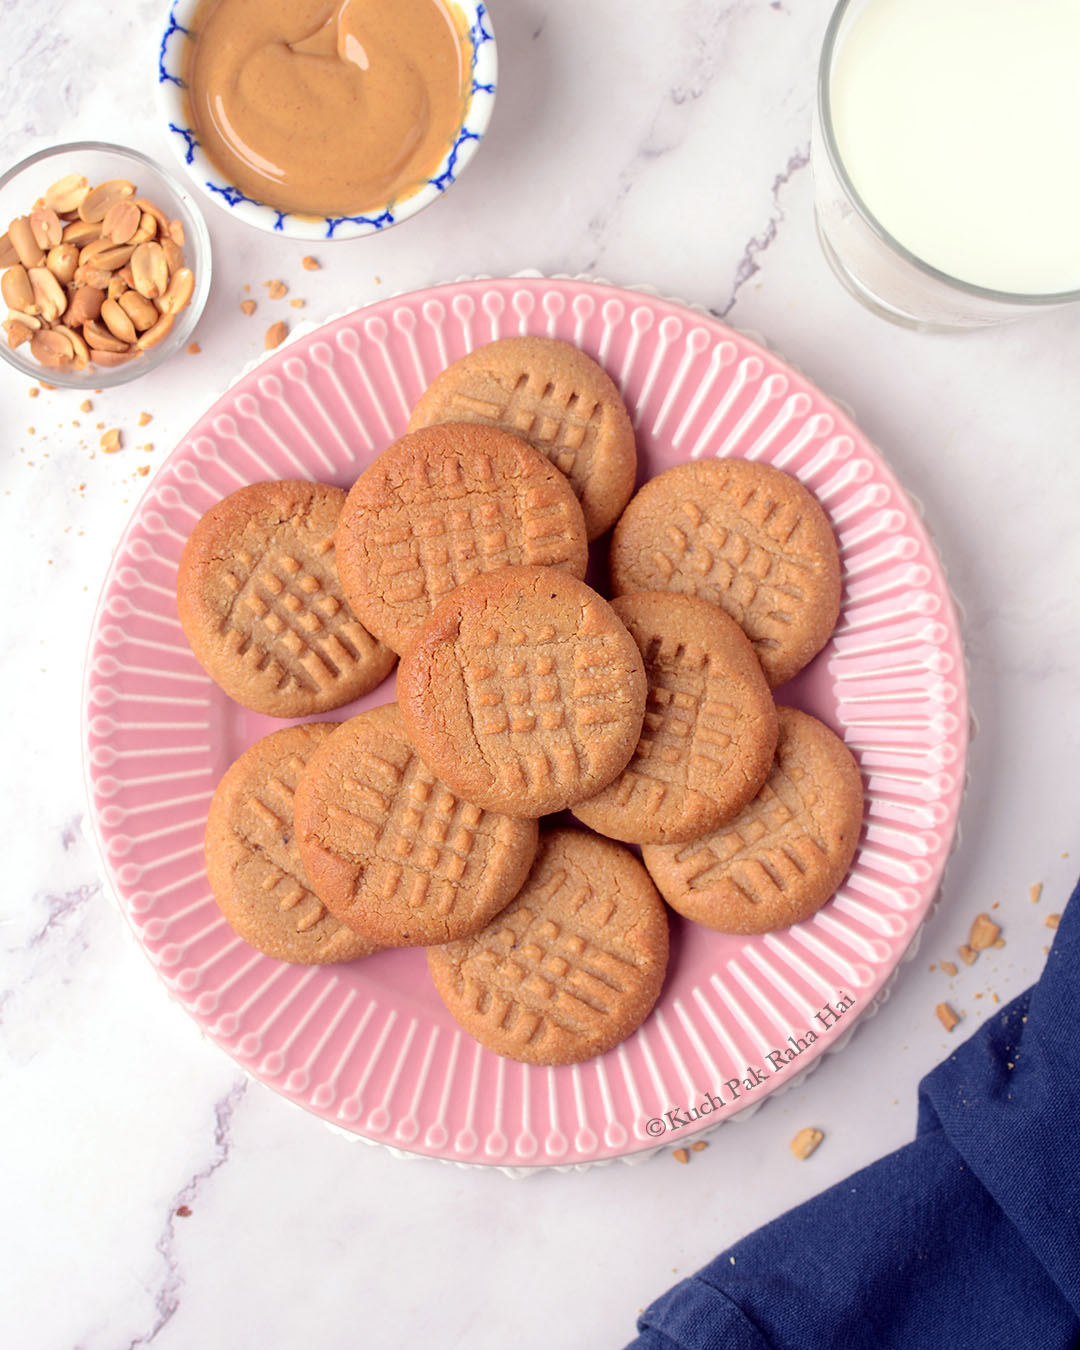 Almond flour peanut butter cookies without egg.